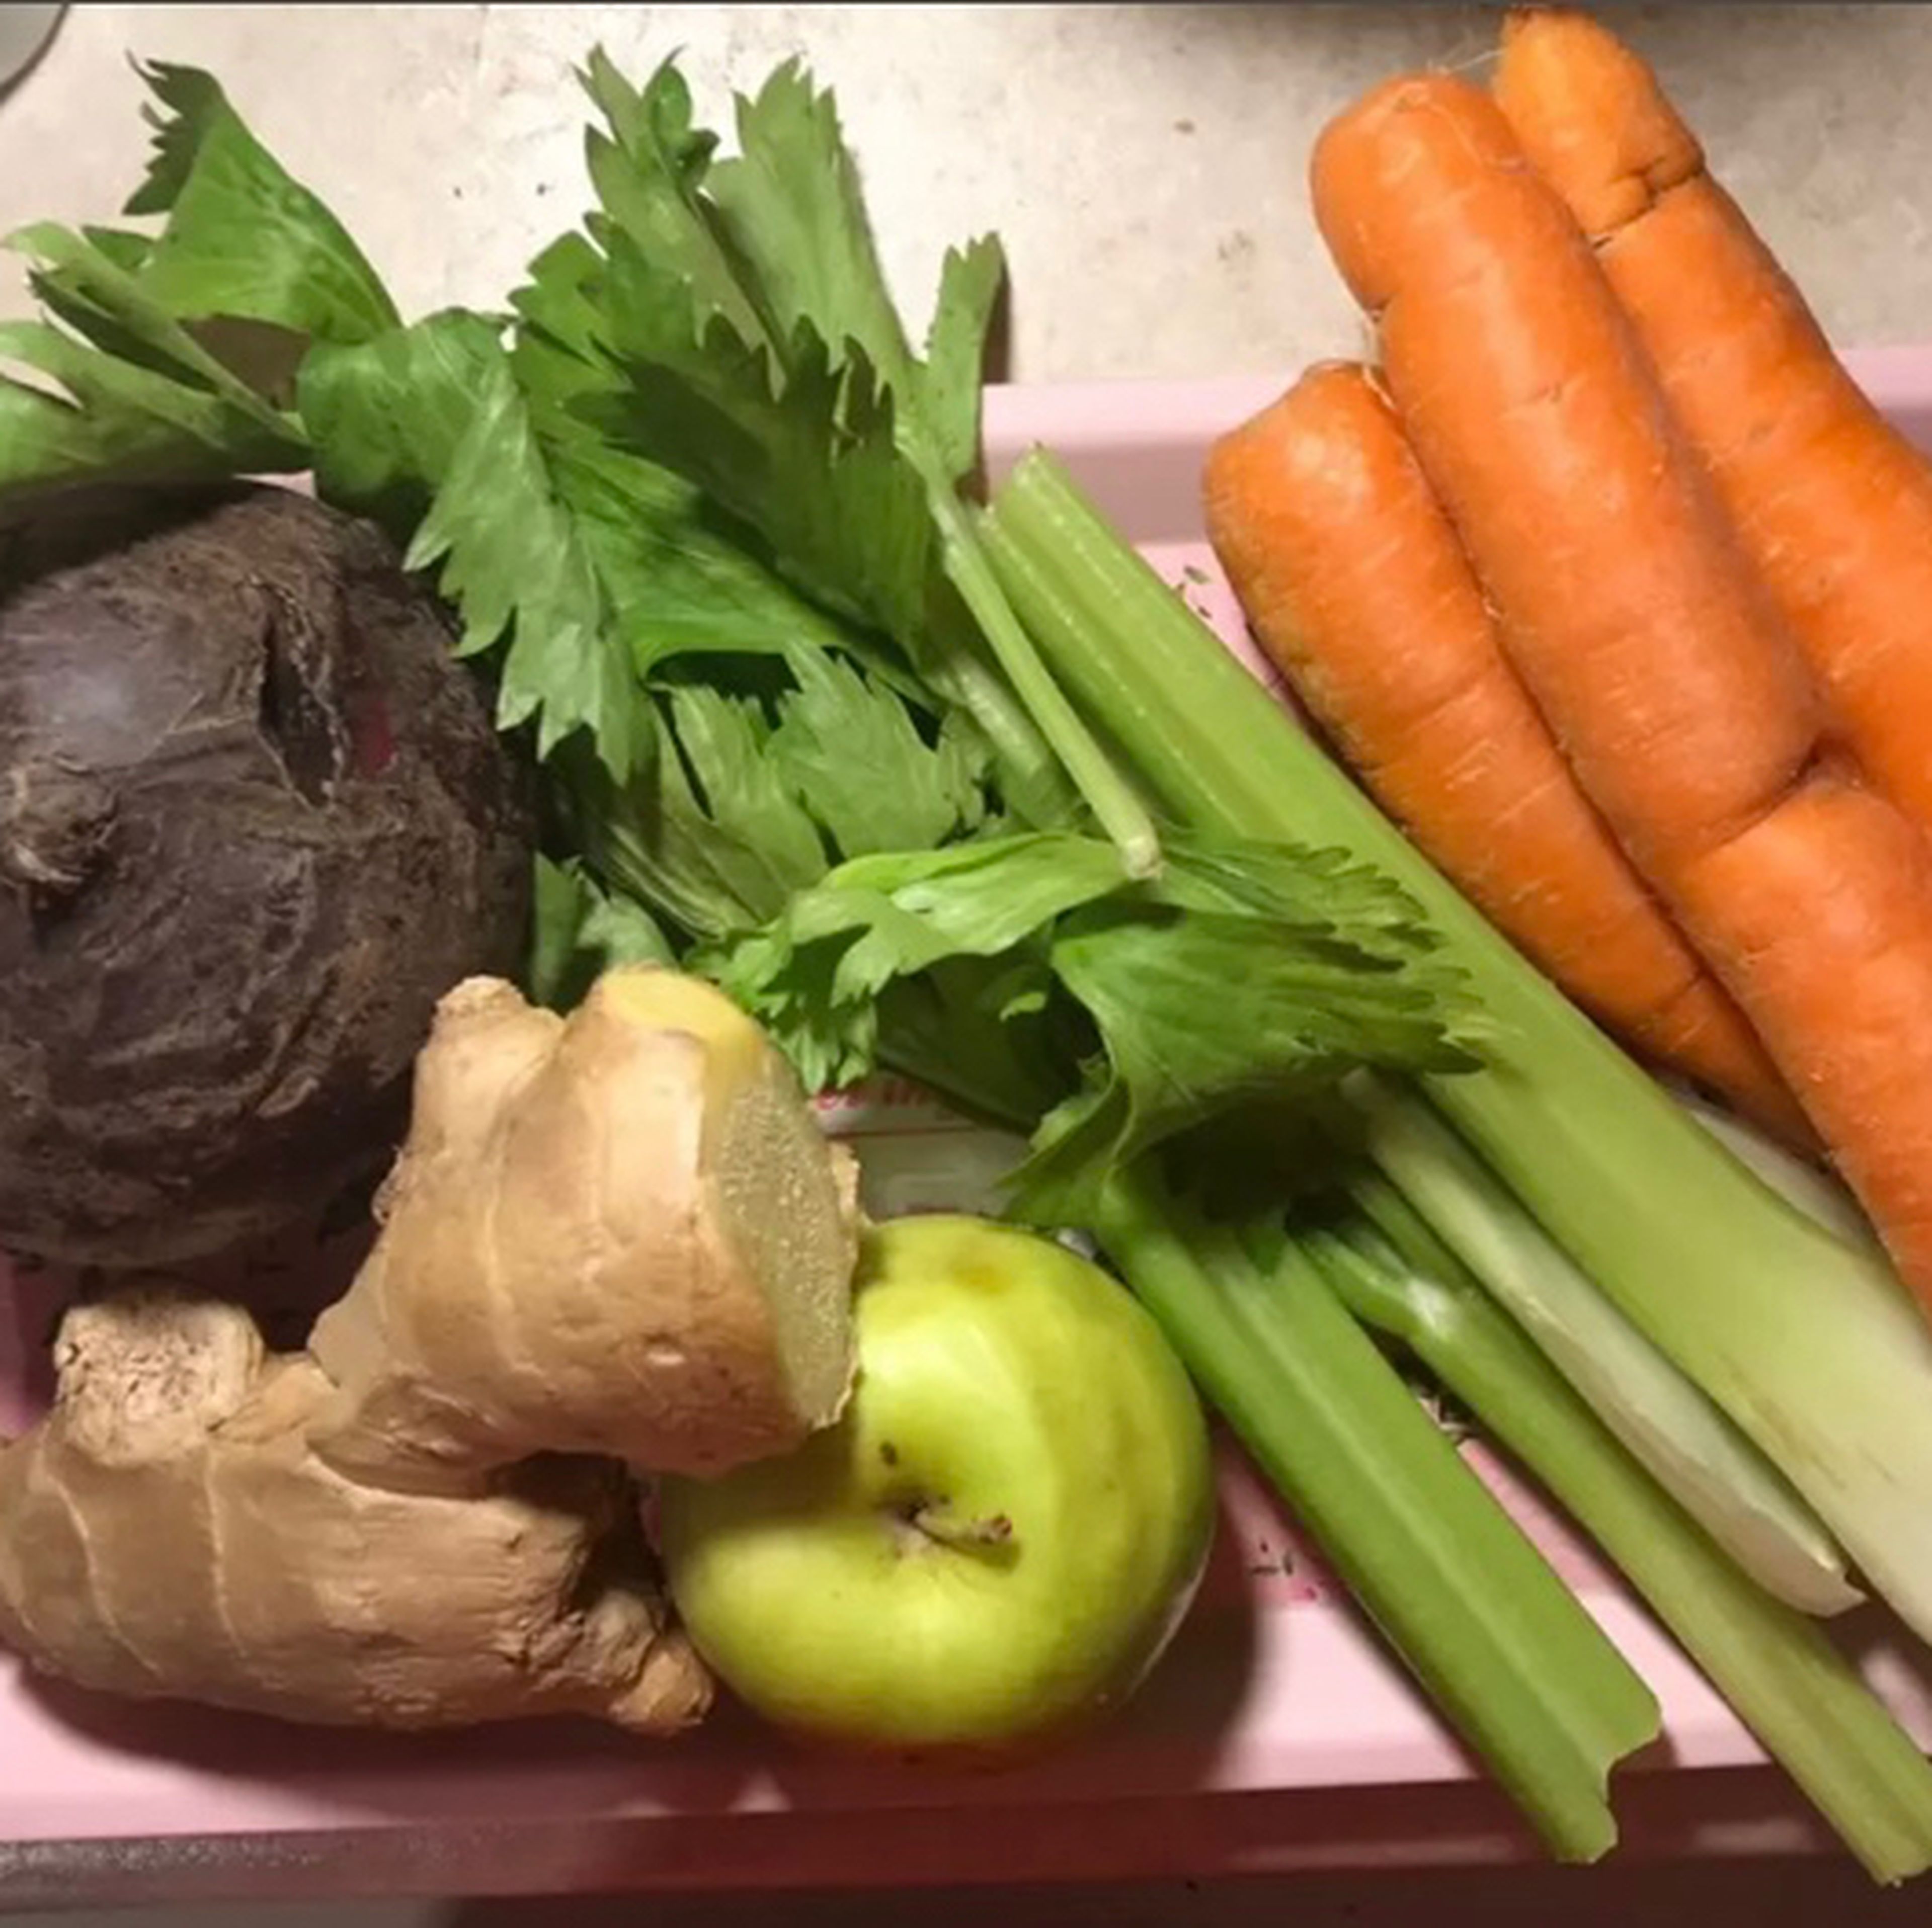 Clean and wash all the vegetables and prepare them.